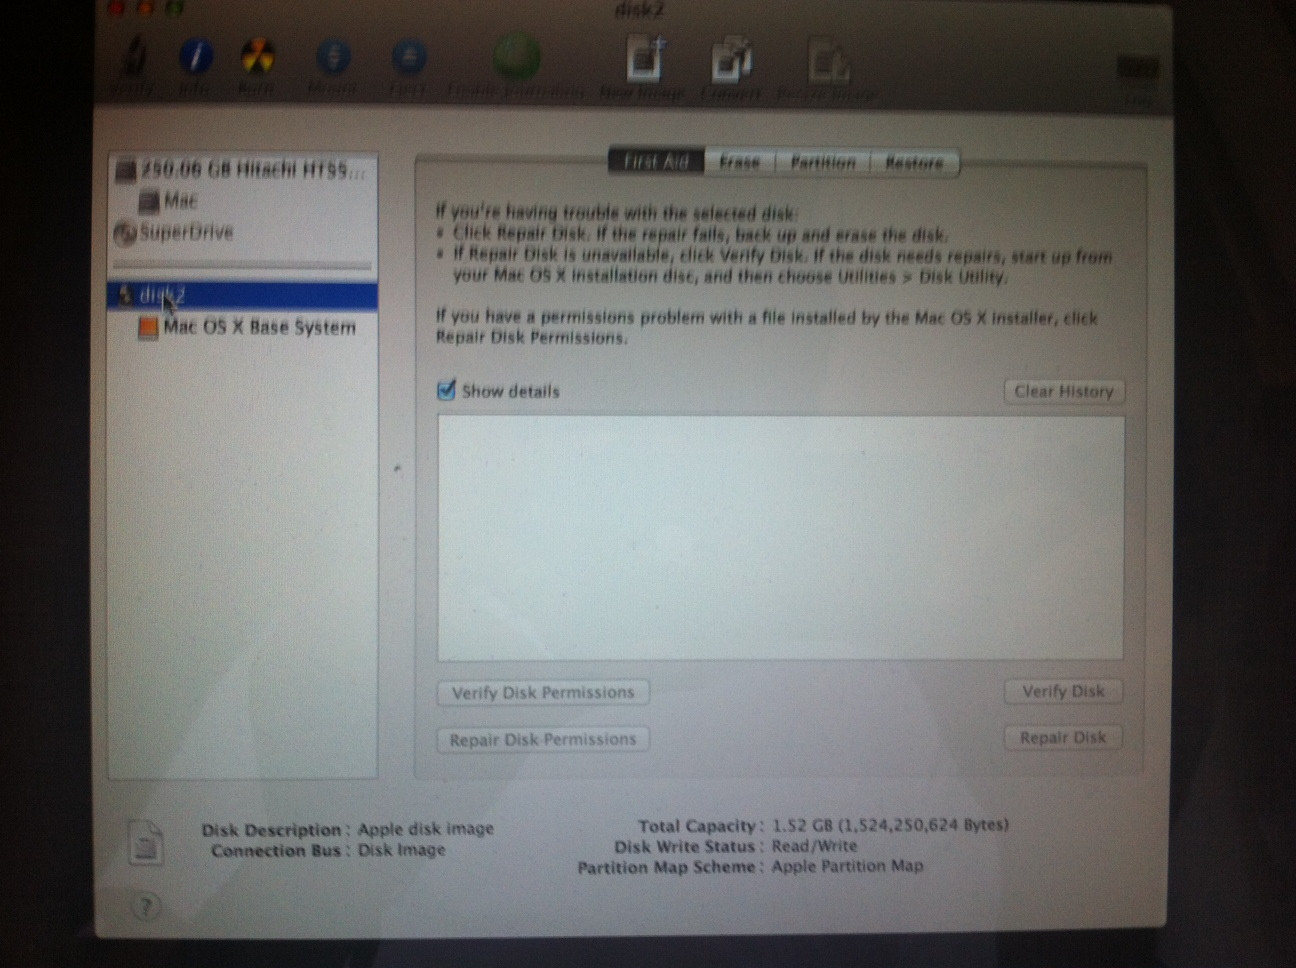 Download Disk Utility For Mac Os X